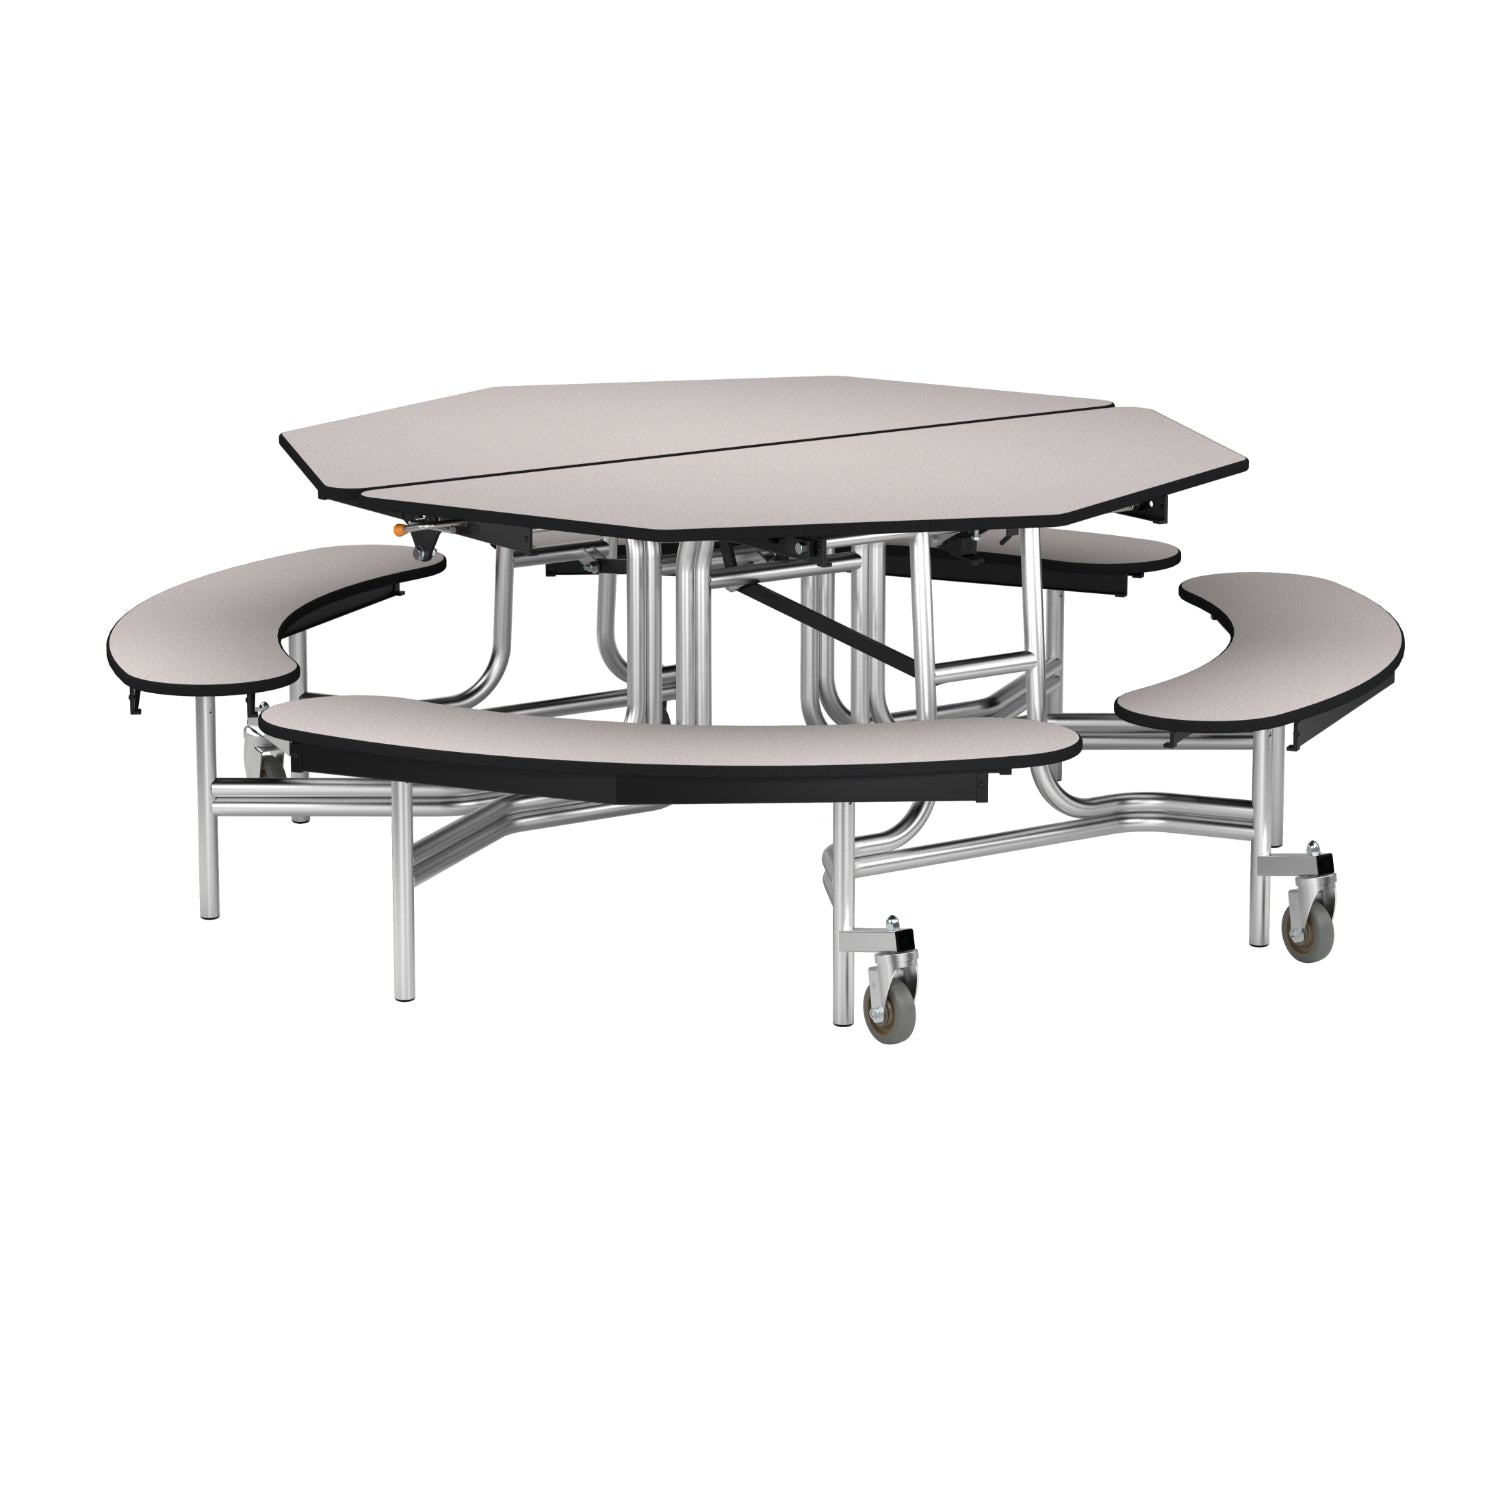 Mobile Cafeteria Table with Benches, 60" Octagon, Plywood Core, Vinyl T-Mold Edge, Chrome Frame